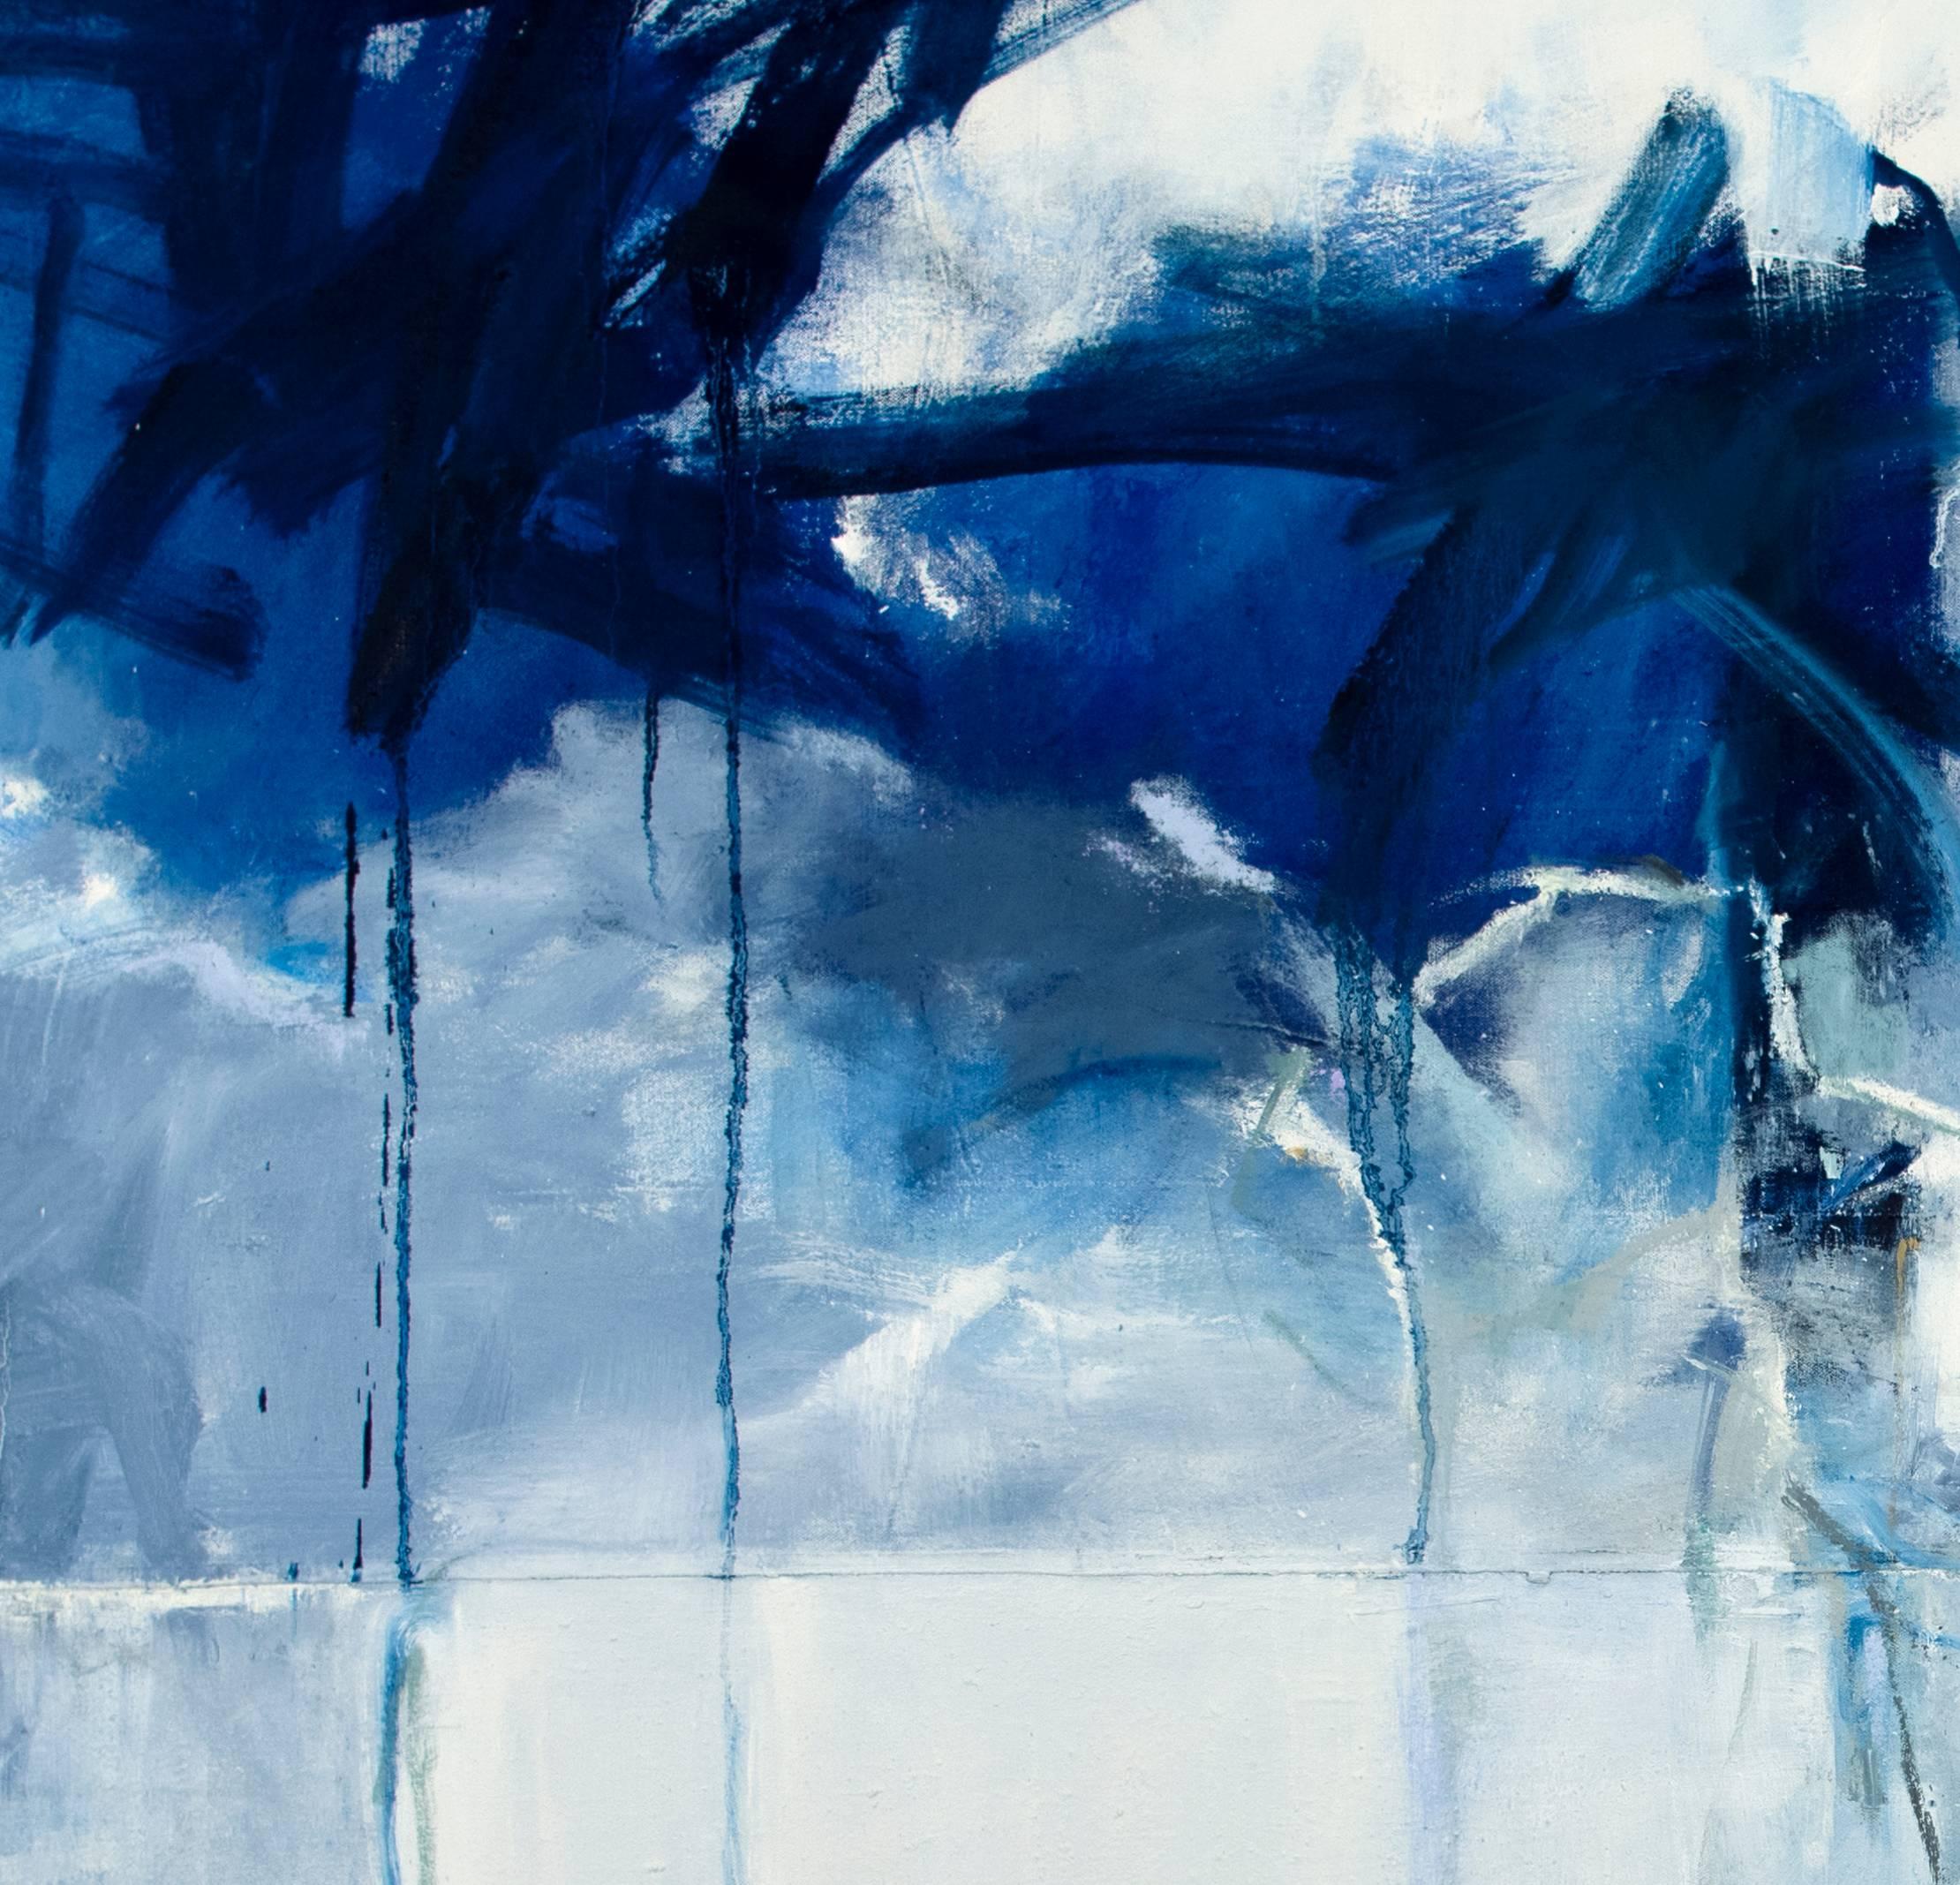 Back to the Blue Motel - Contemporary Painting by Emilia Dubicki